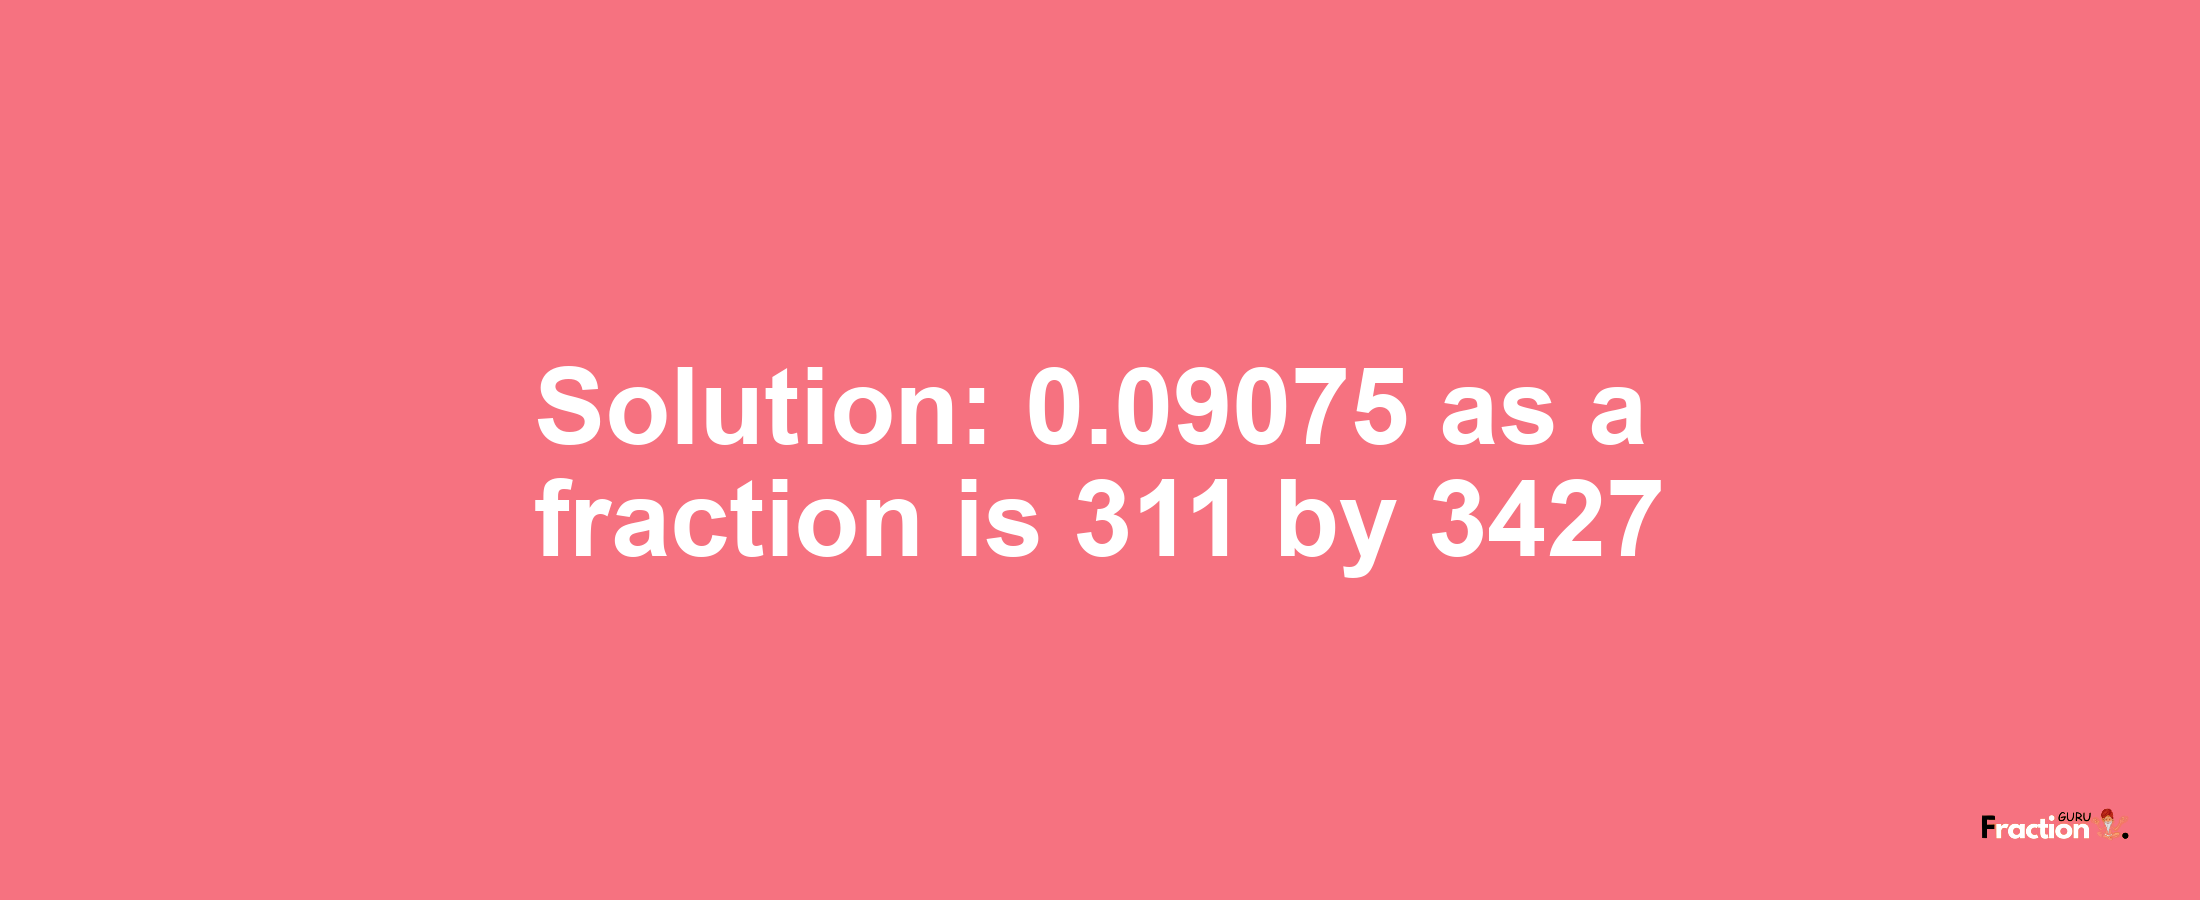 Solution:0.09075 as a fraction is 311/3427